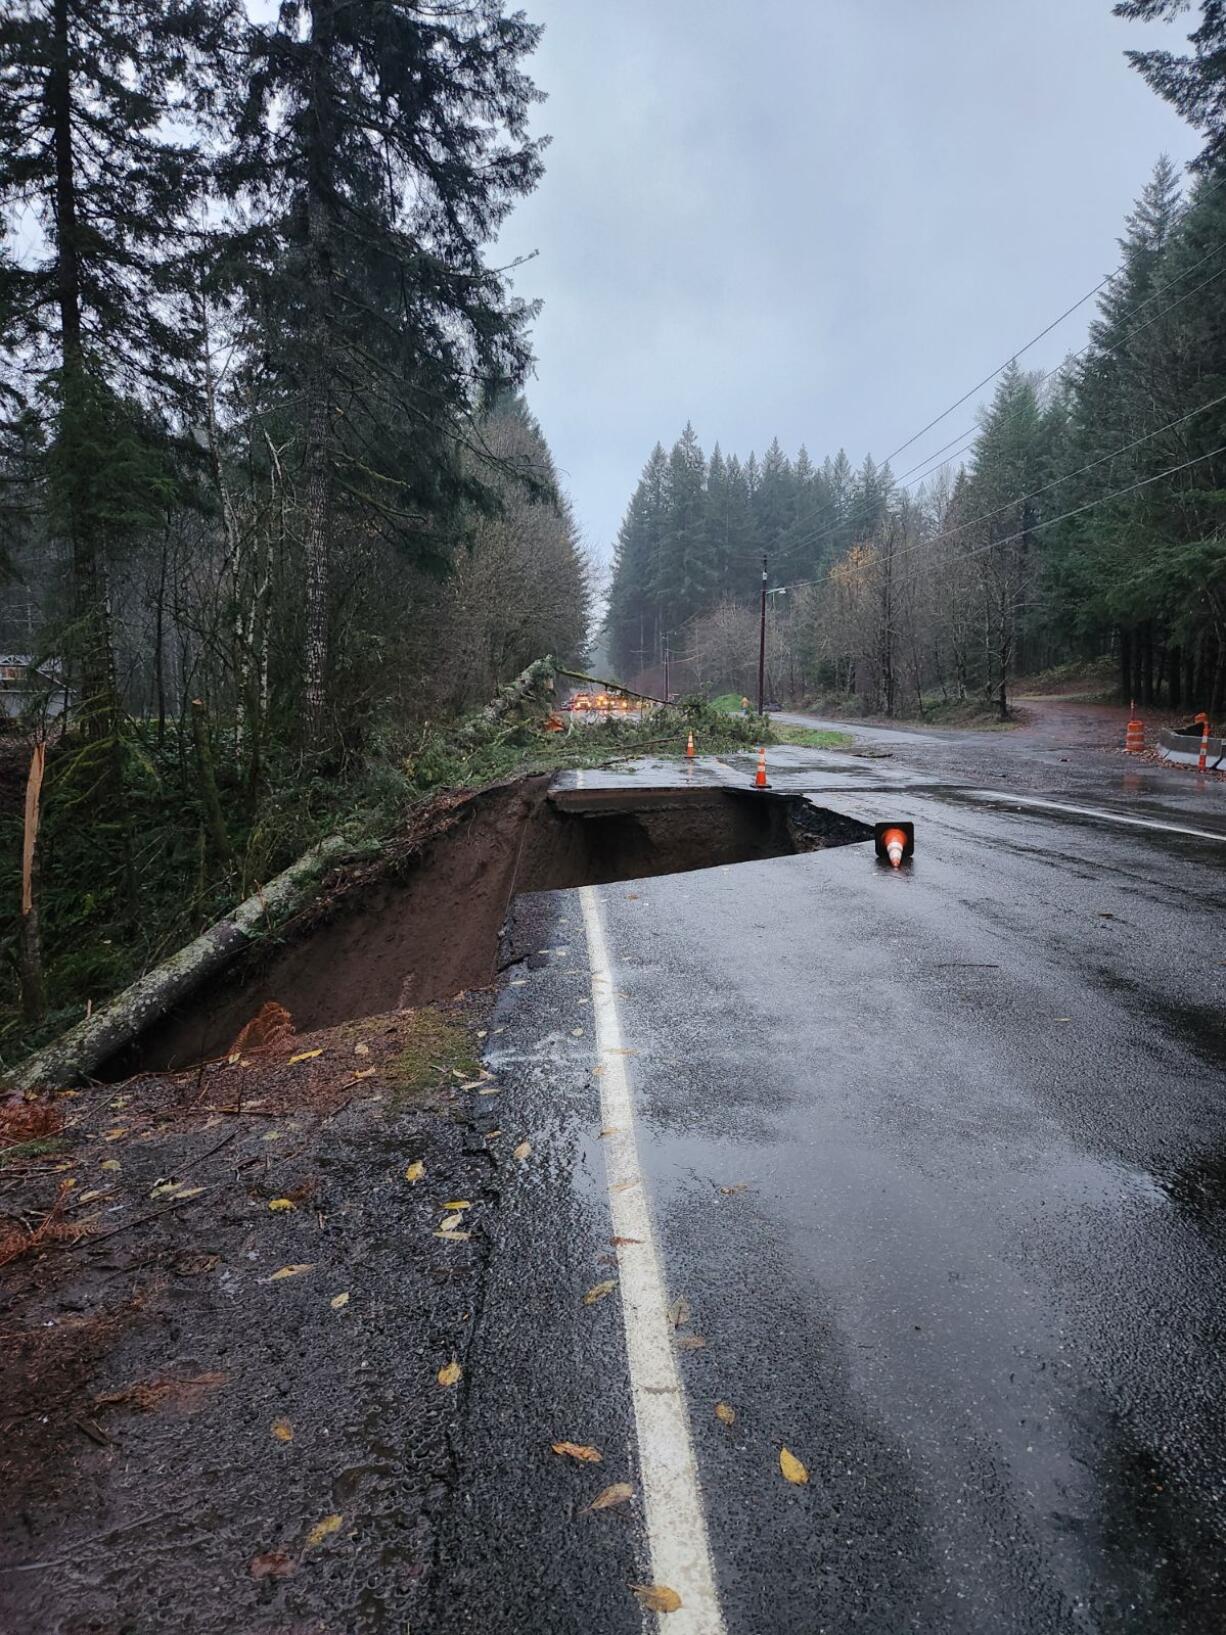 Lewis River Highway closed to traffic in both directions near Cougar on Tuesday after a landslide damage the road.